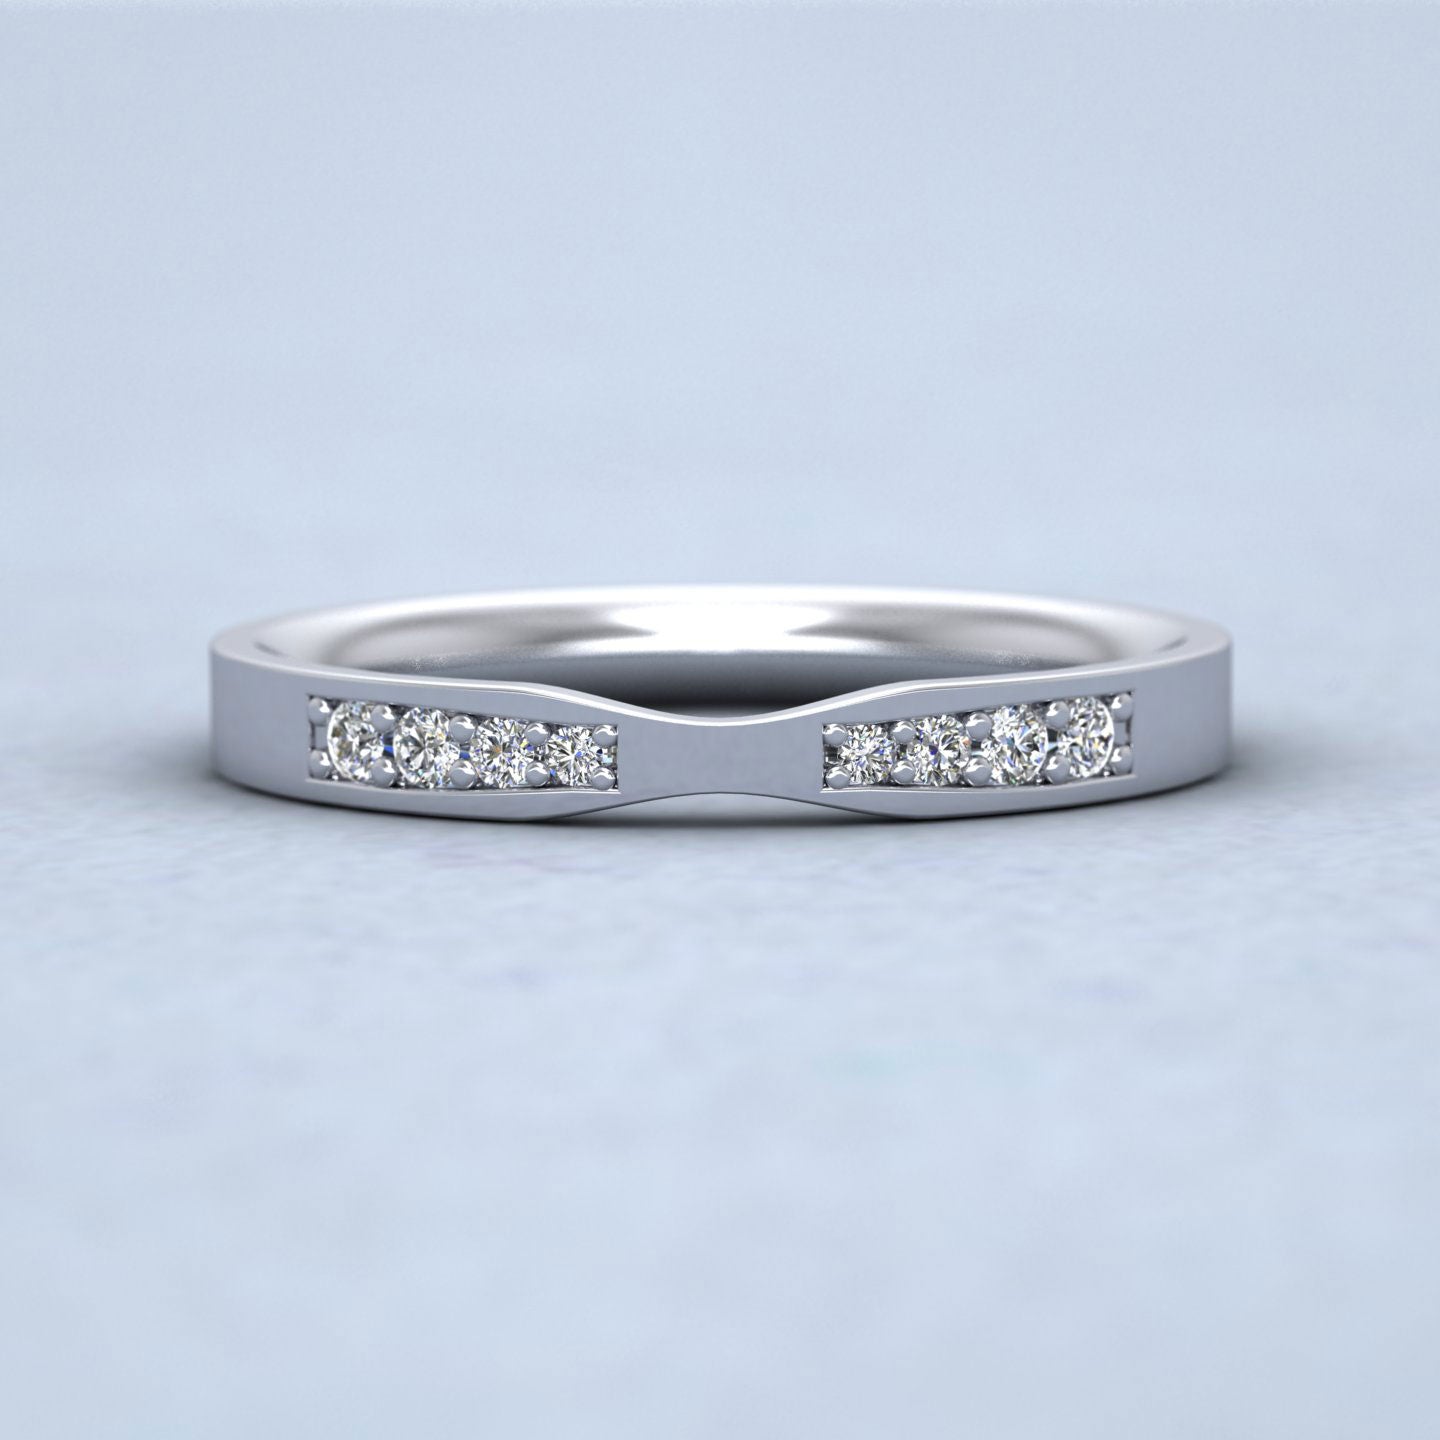 Pinch Shaped Wedding Ring In 950 Platinum 2.5mm Wide